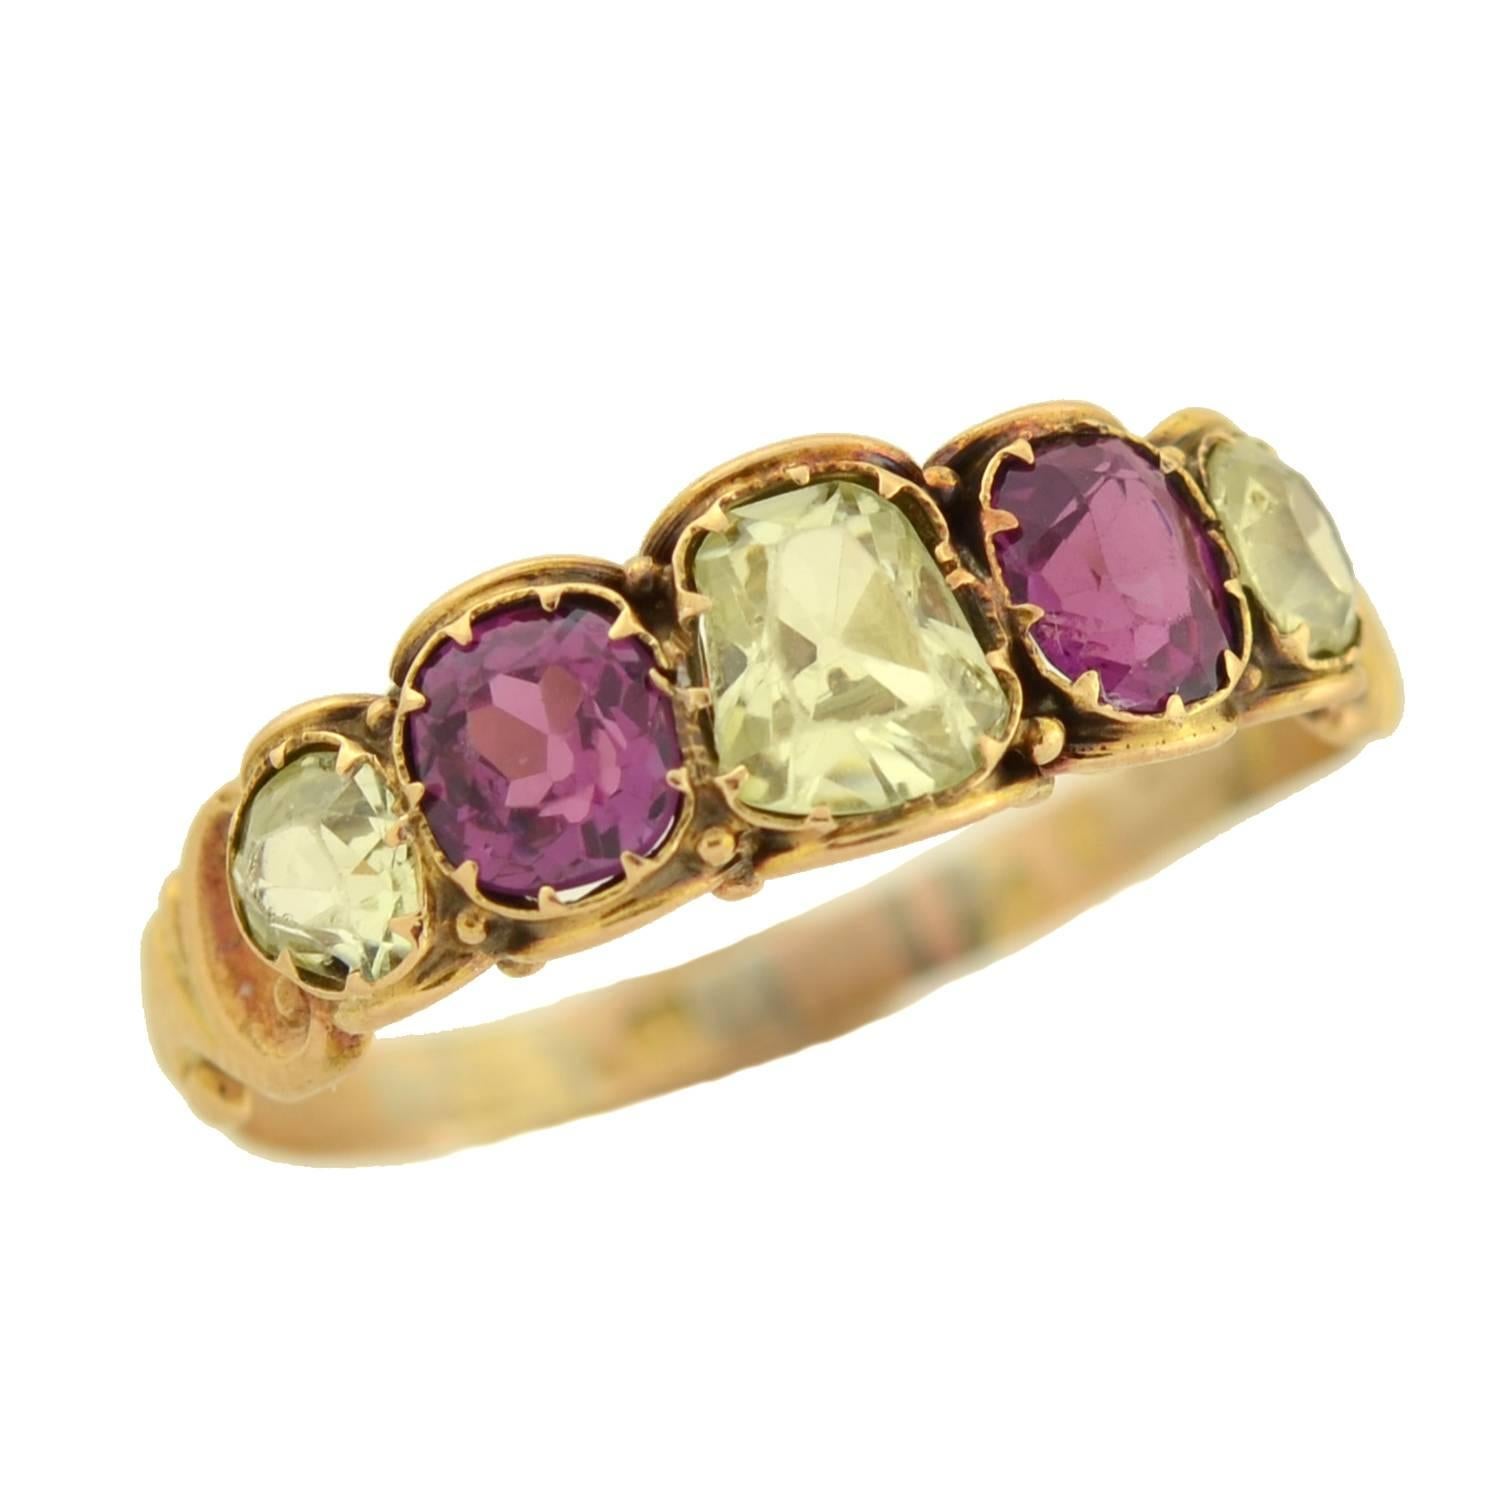 Women's Early Victorian Chrysoberyl Pink Sapphire Ring